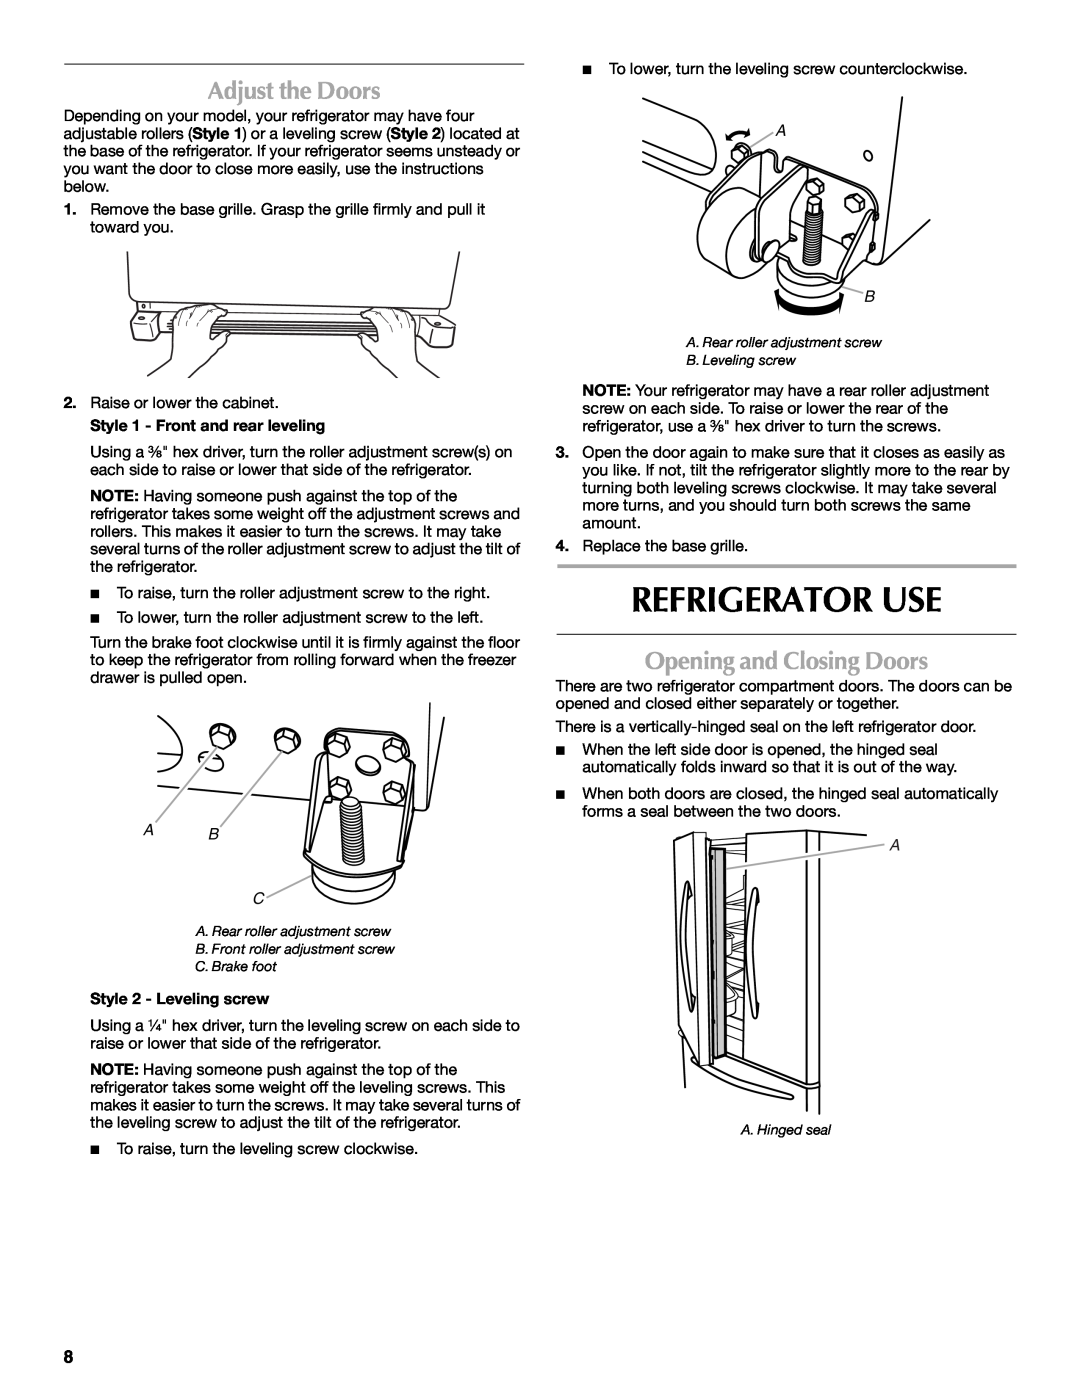 Maytag MFI2568AES, W10175444A, W10175477A Refrigerator Use, Adjust the Doors, Opening and Closing Doors, A B C 